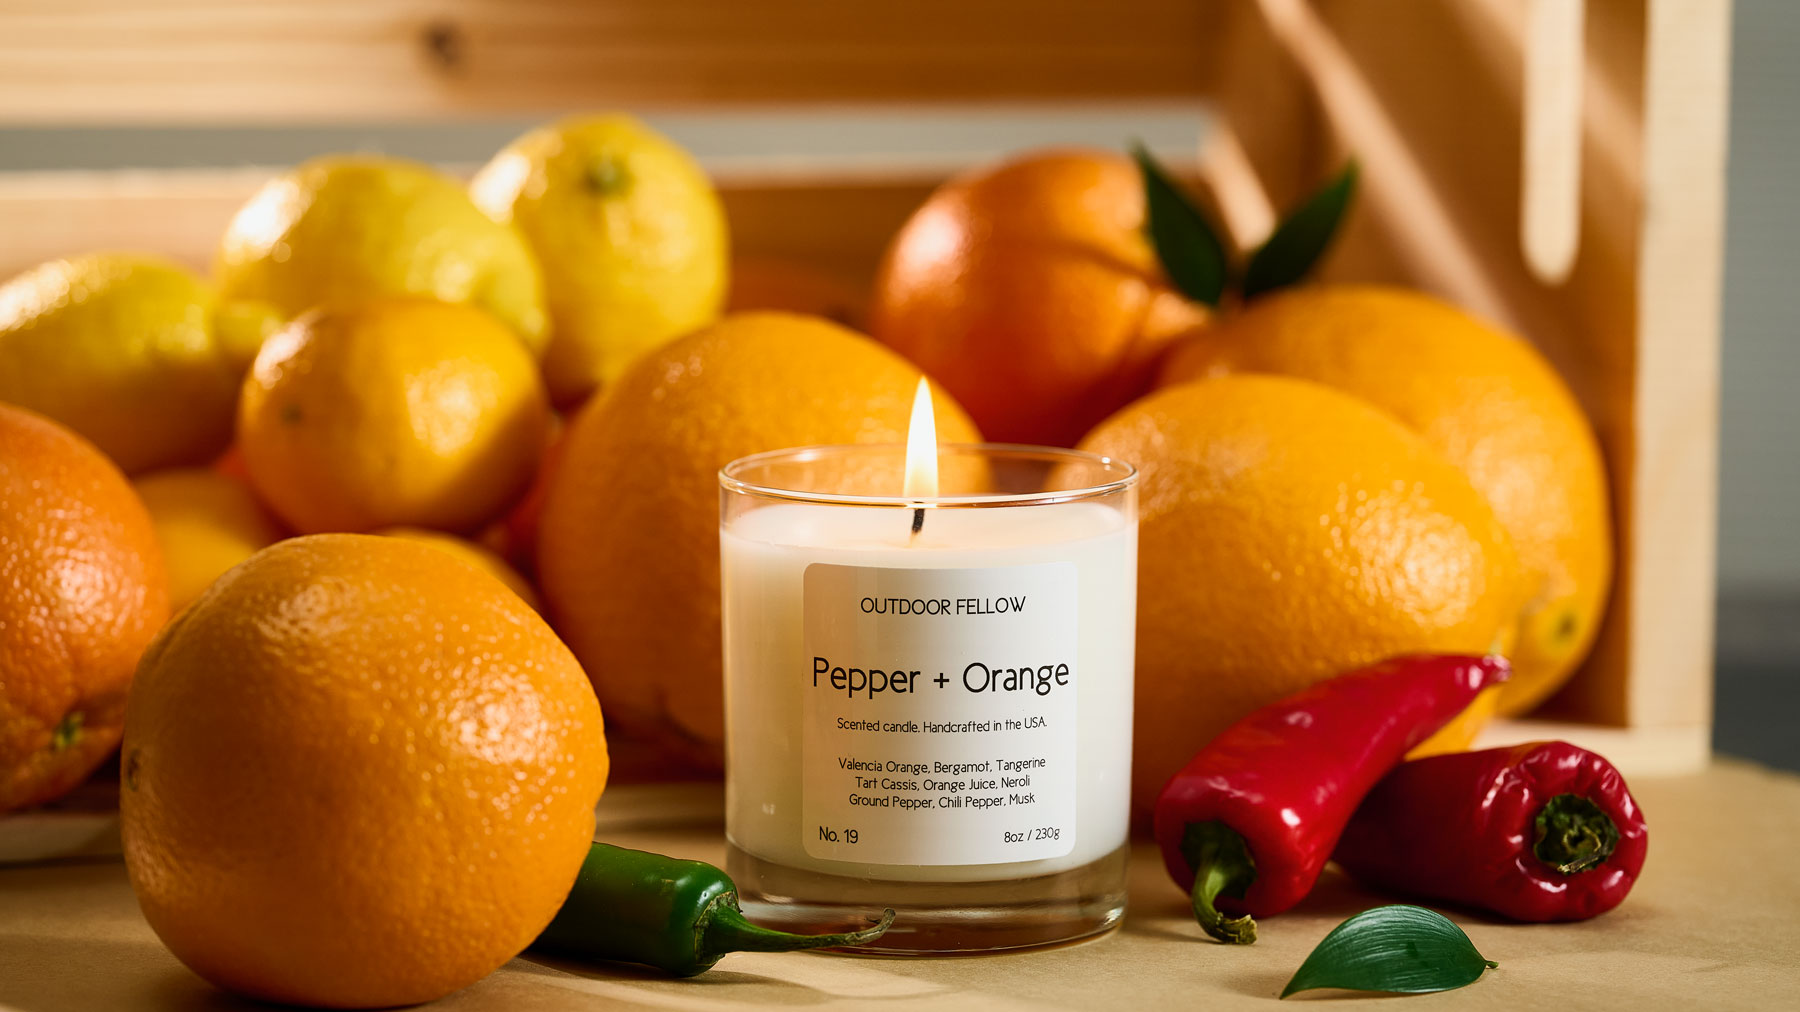 Pepper and Orange scented candle surrounded by oranges and peppers